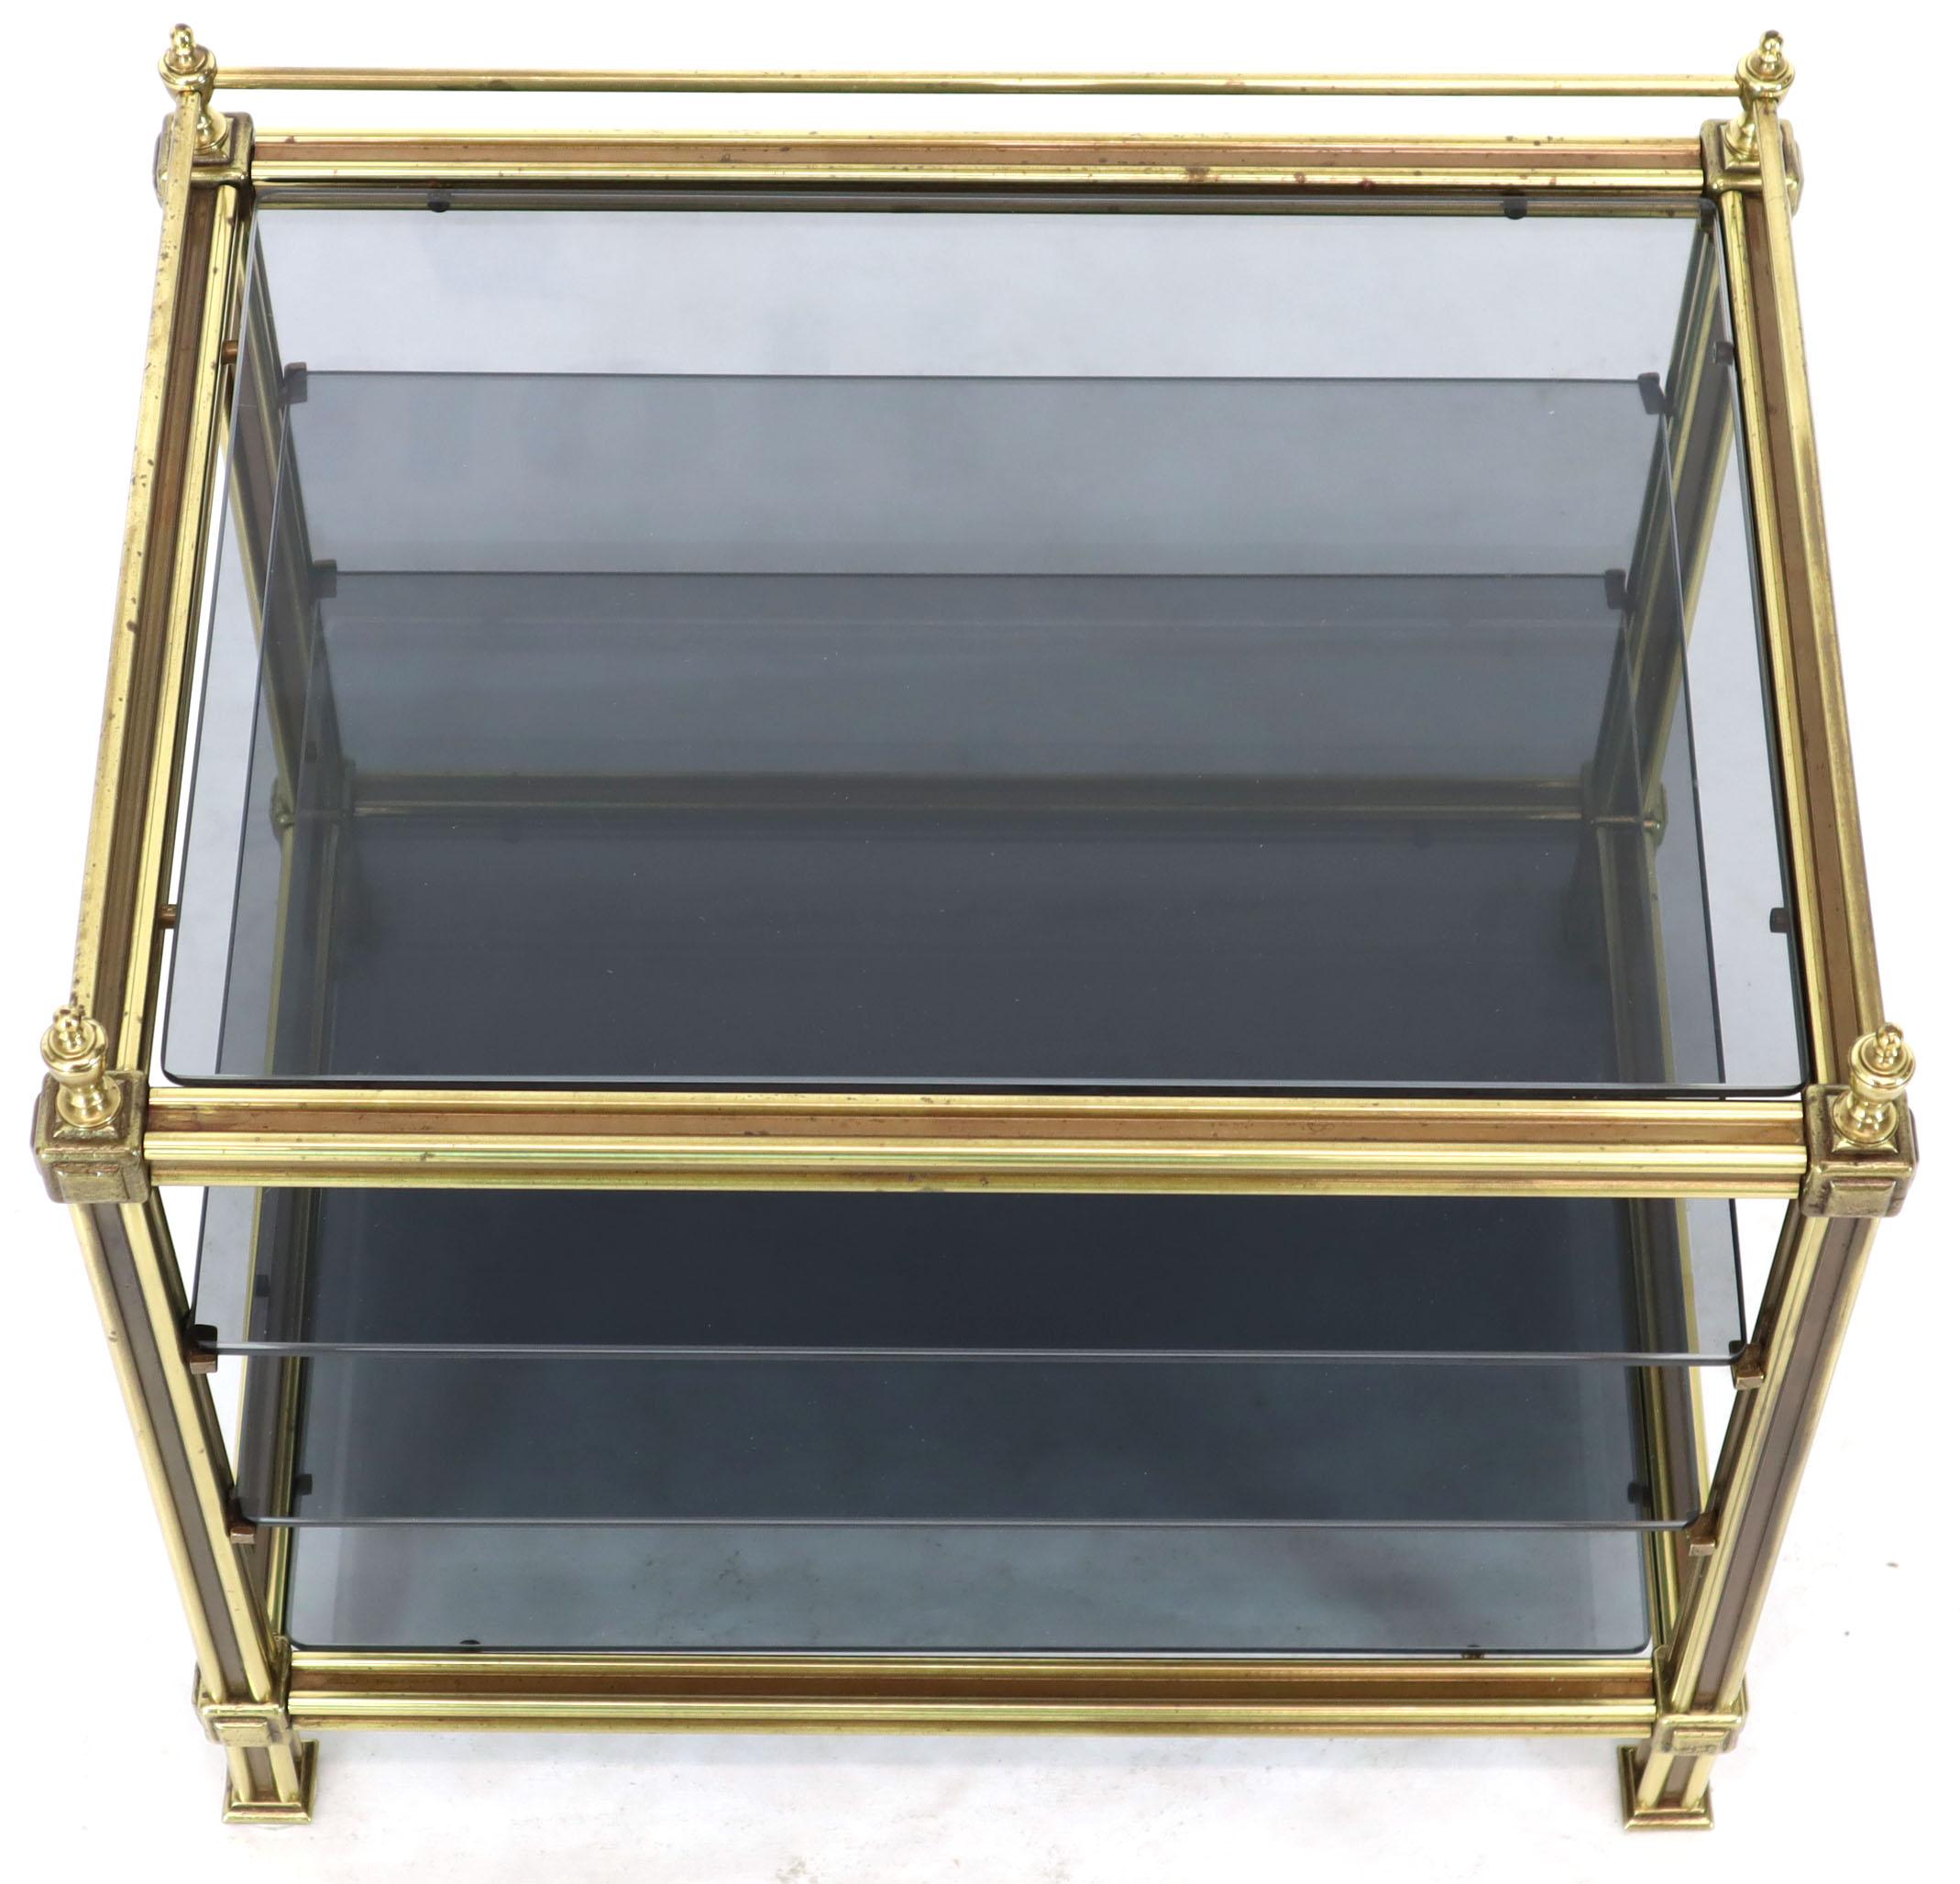 20th Century Fine Brass Smoked Glass Magazine Rack Stand Paper Tray with Gallery